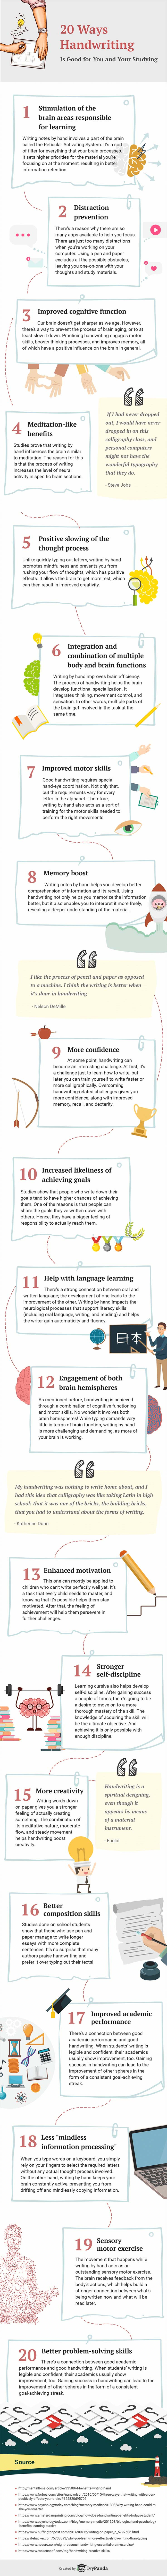 20 Benefits of Handwriting For Your Learning Process